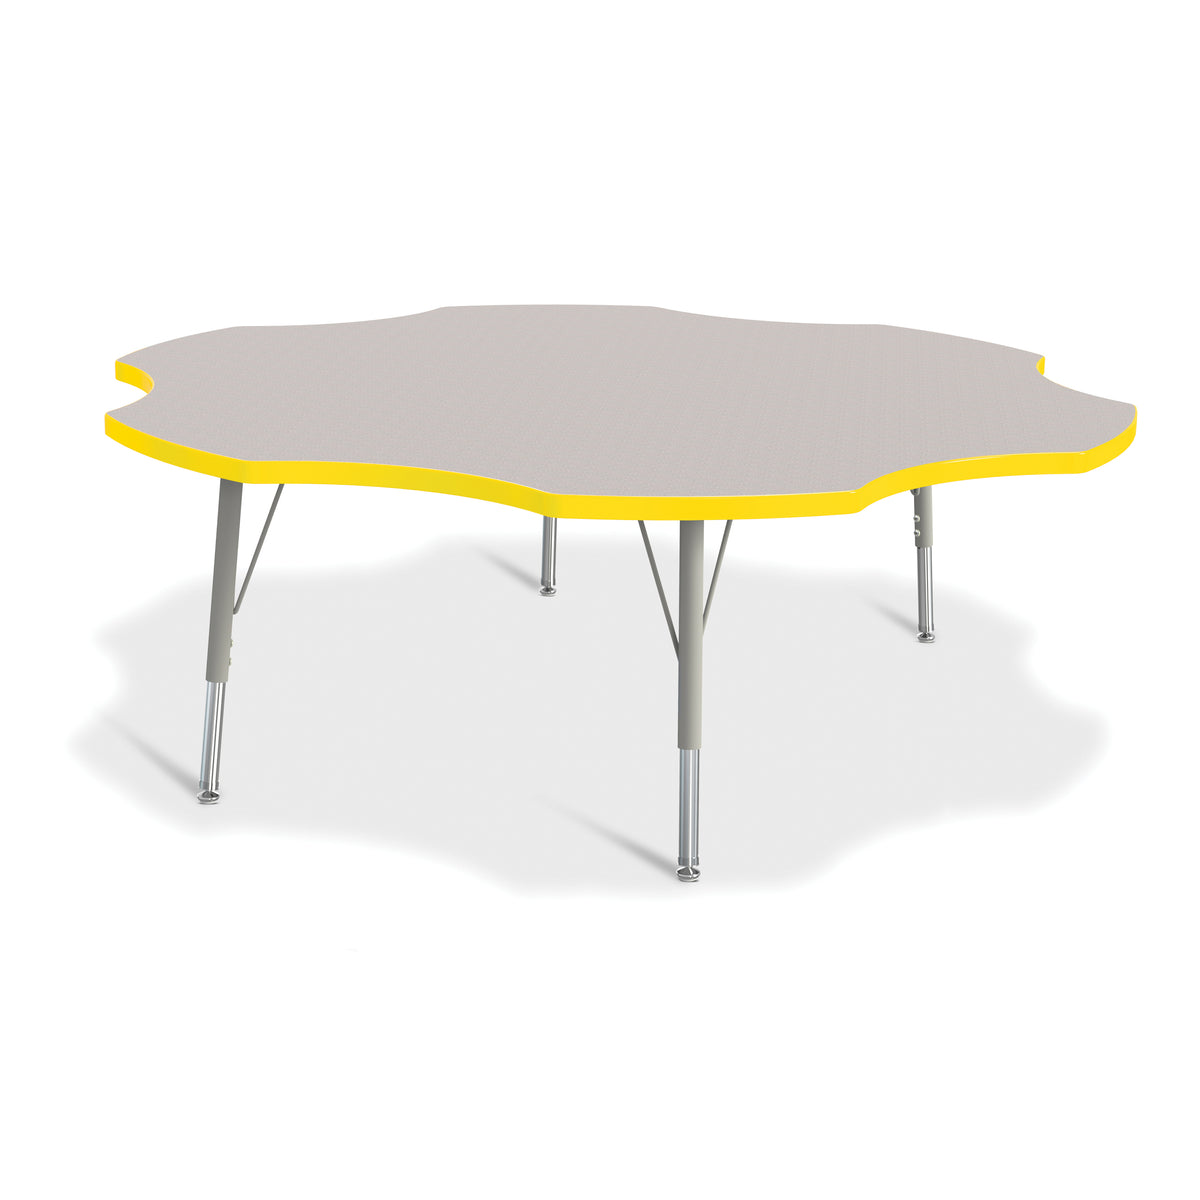 6458JCE007, Berries Six Leaf Activity Table - 60", E-height - Freckled Gray/Yellow/Gray